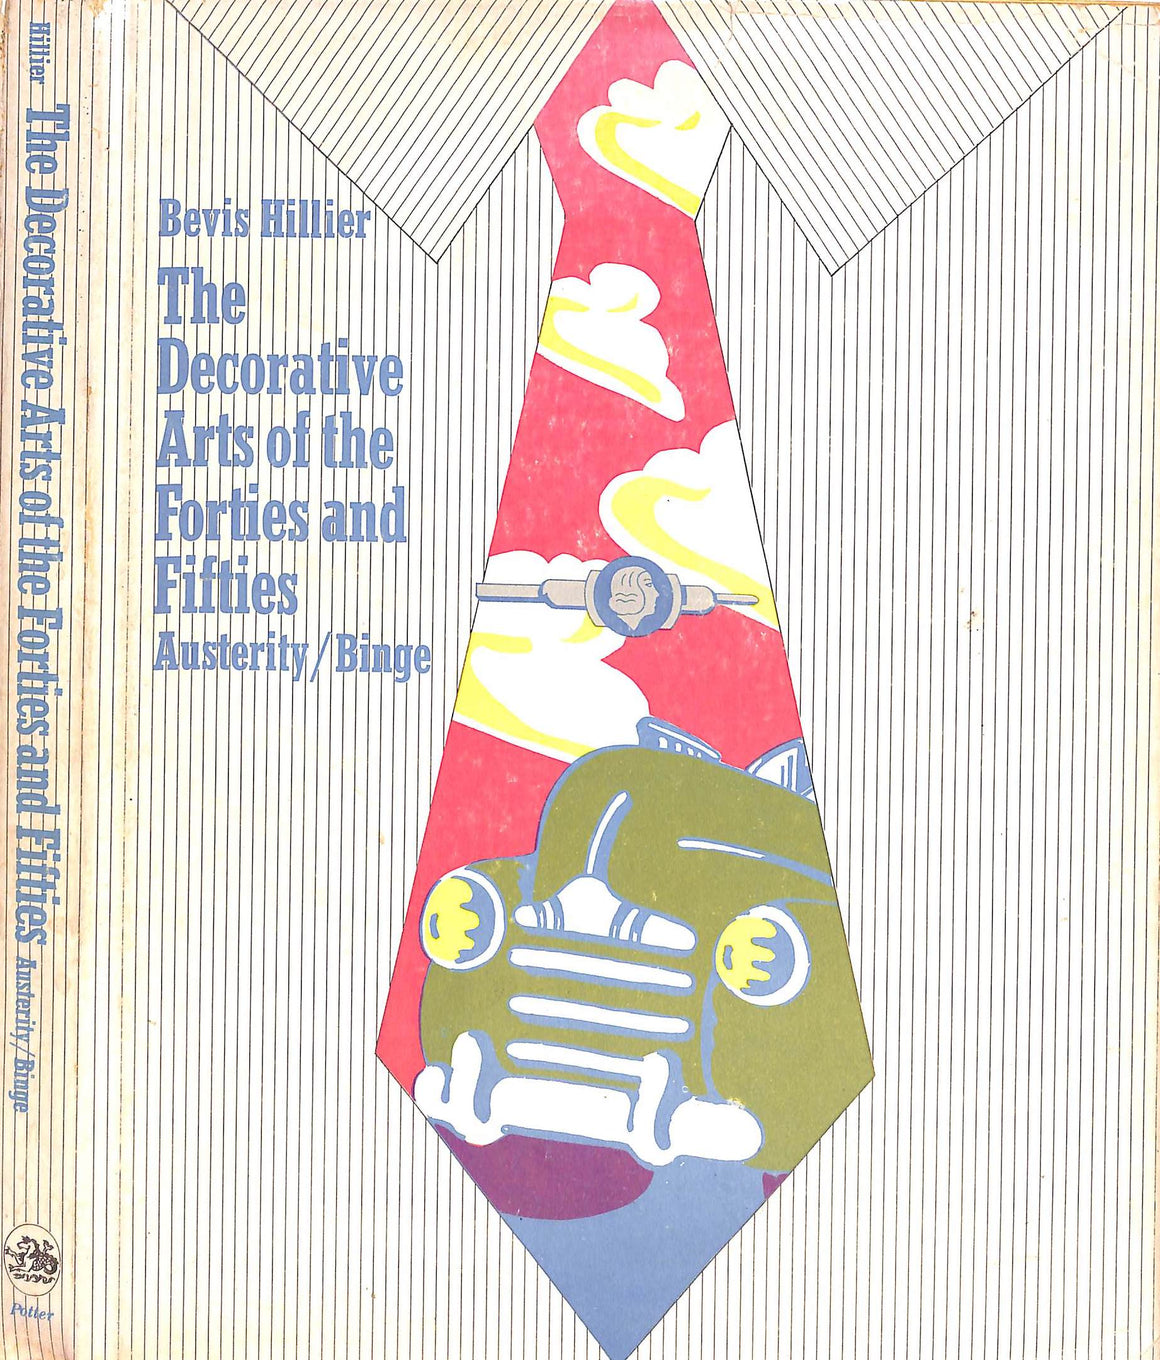 "The Decorative Arts Of The Forties And Fifties" 1975 HILLIER, Bevis